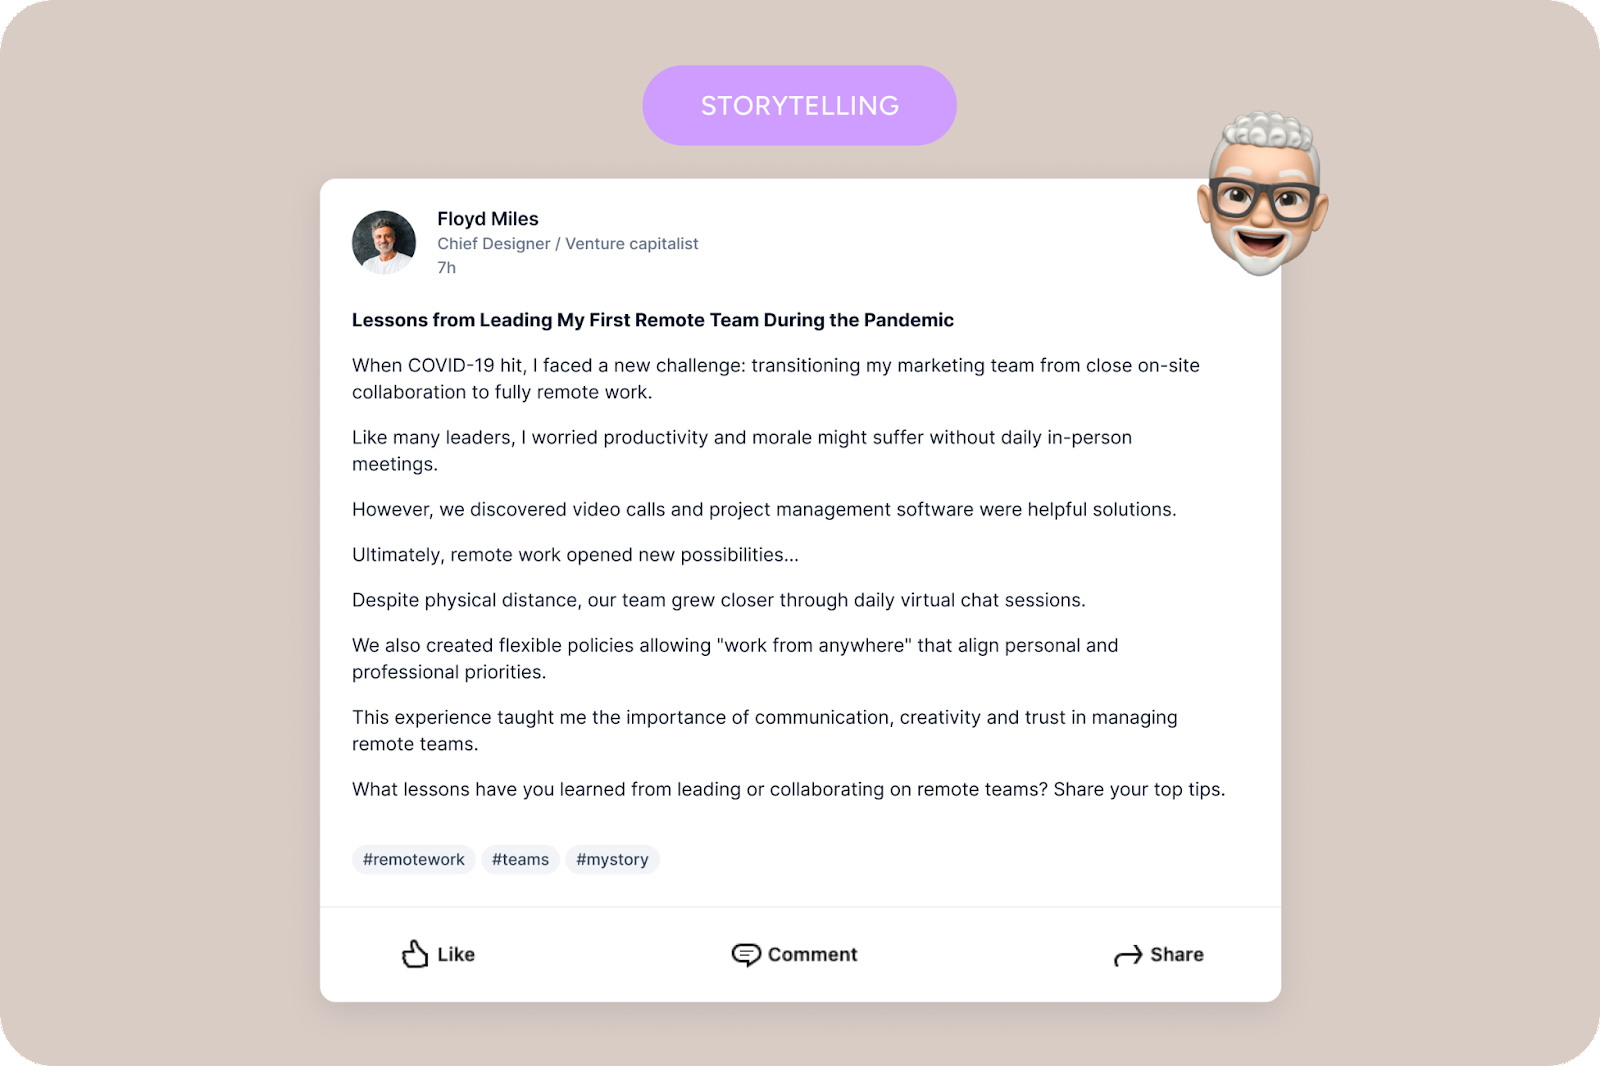 Queue's platform displaying a storytelling-style post, highlighting how Queue facilitates crafting narrative content that resonates with audiences.